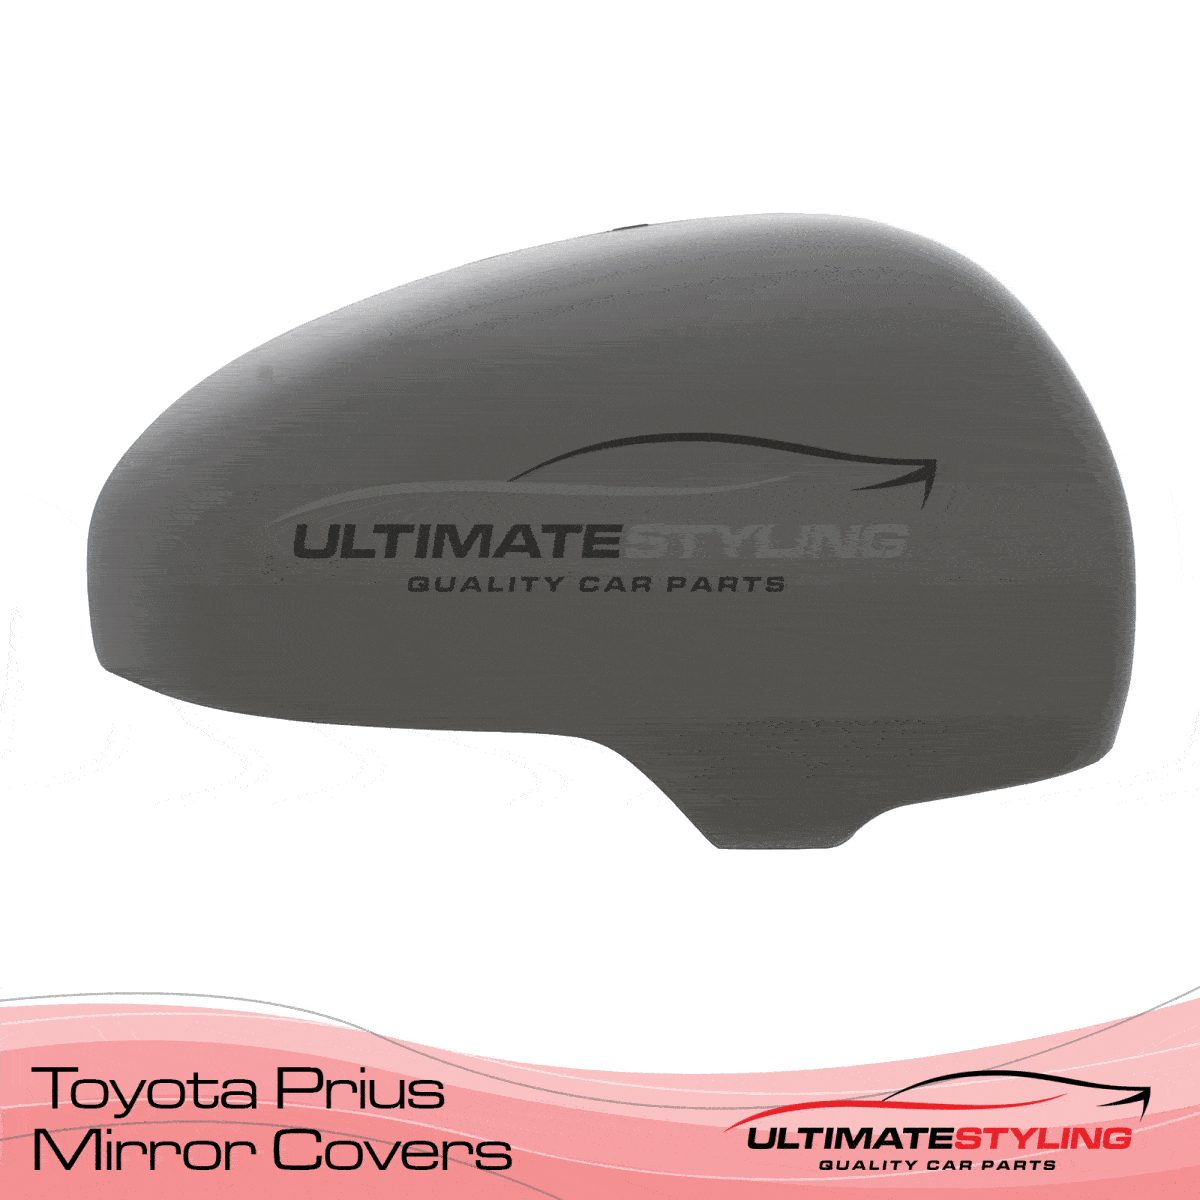 360 degree view of a Toyota Prius wing mirror cover